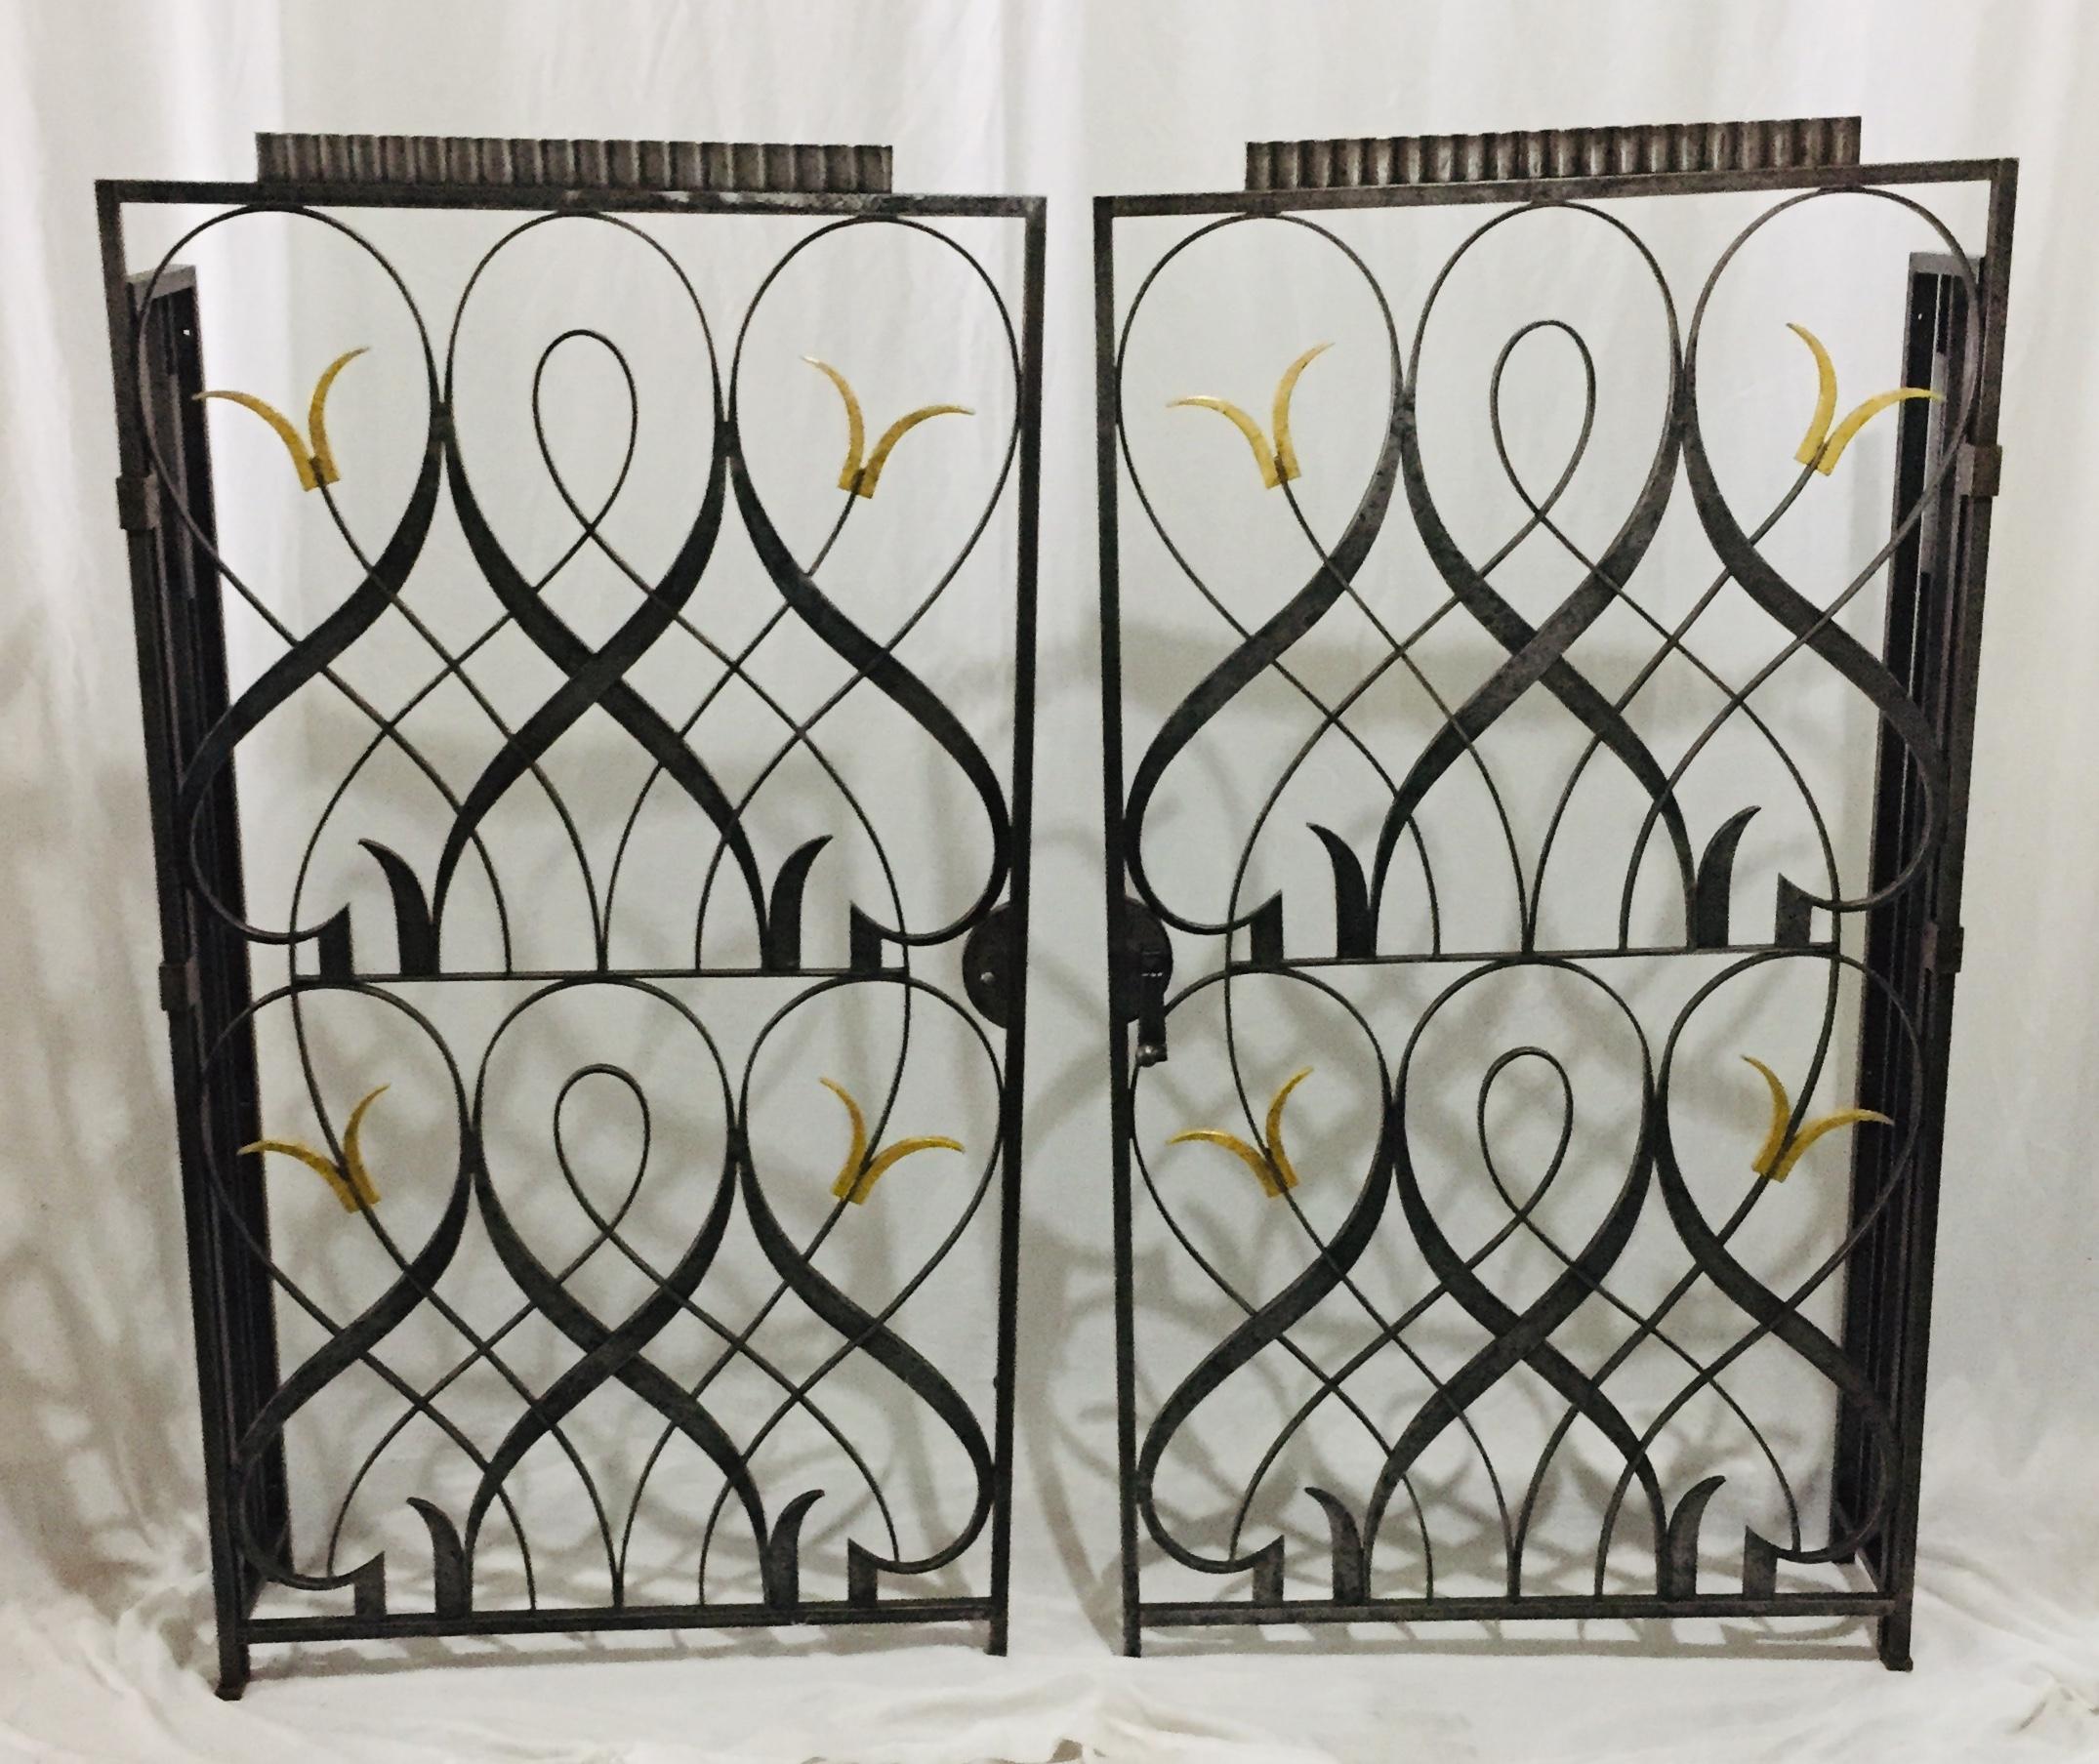 Signed Edgard Brandt French Art Deco Wrought Iron Room Dividers   For Sale 5